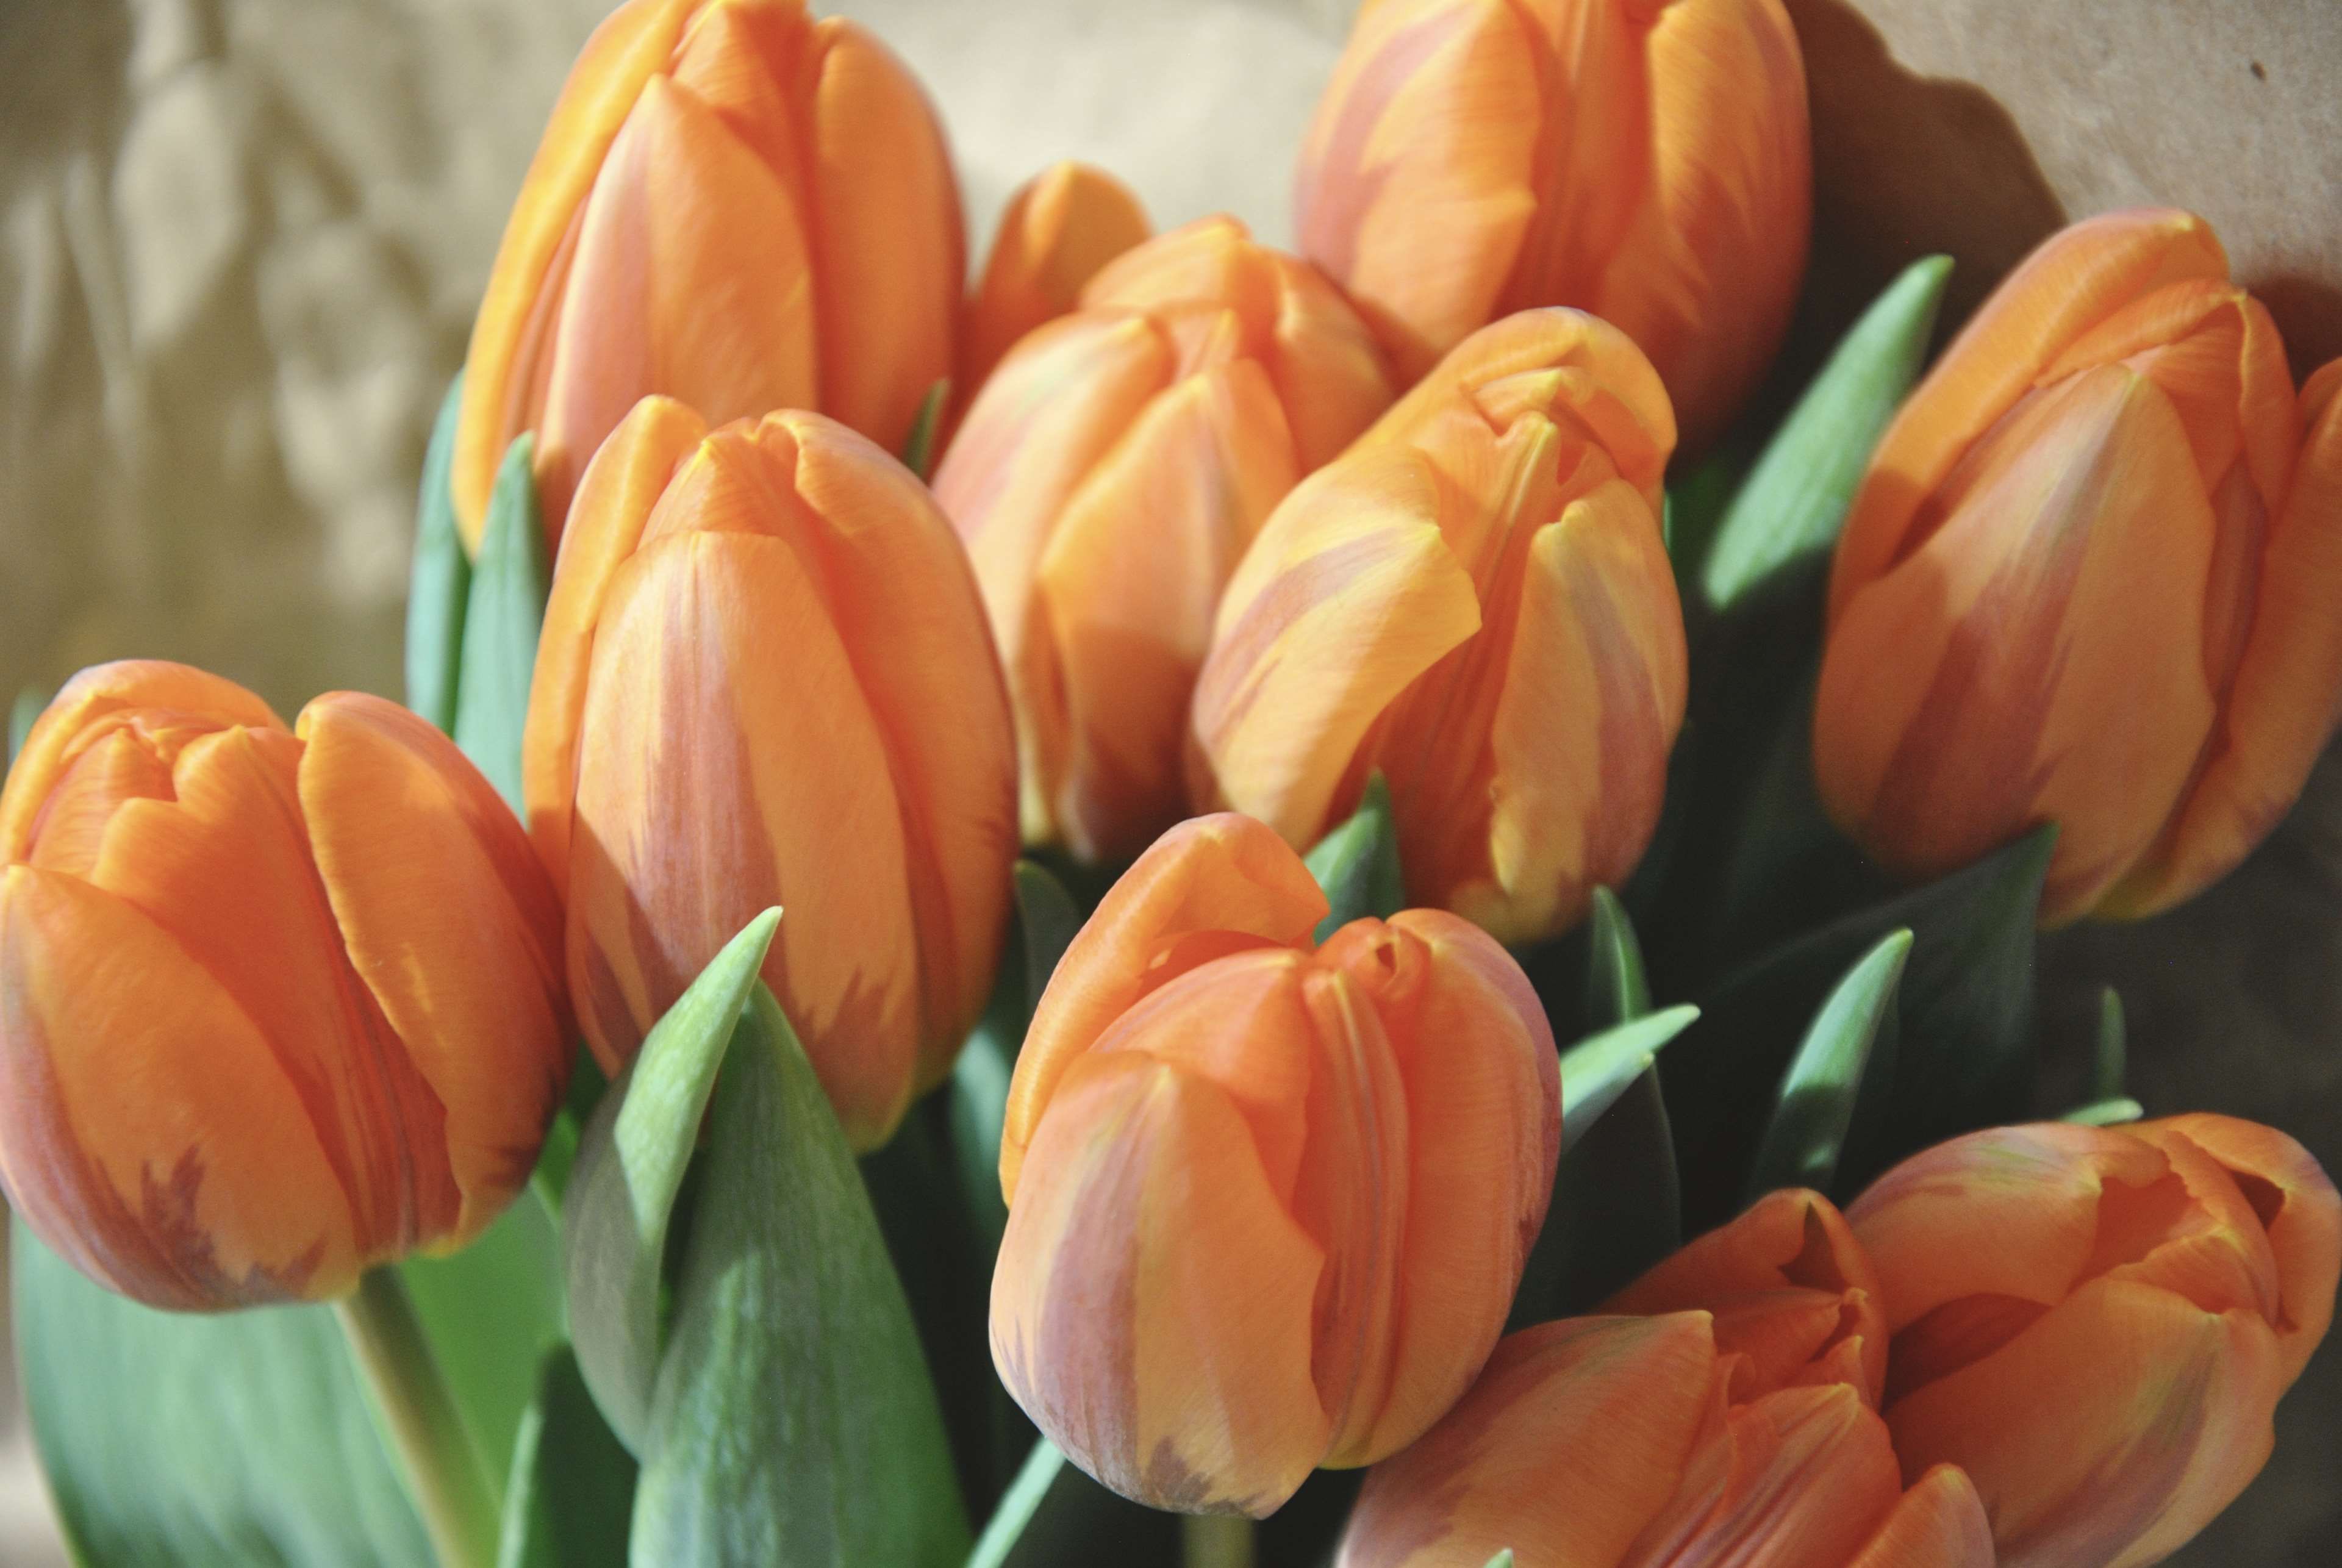 flowers #orange #spring #springtime #tulips | wallpapers and ...